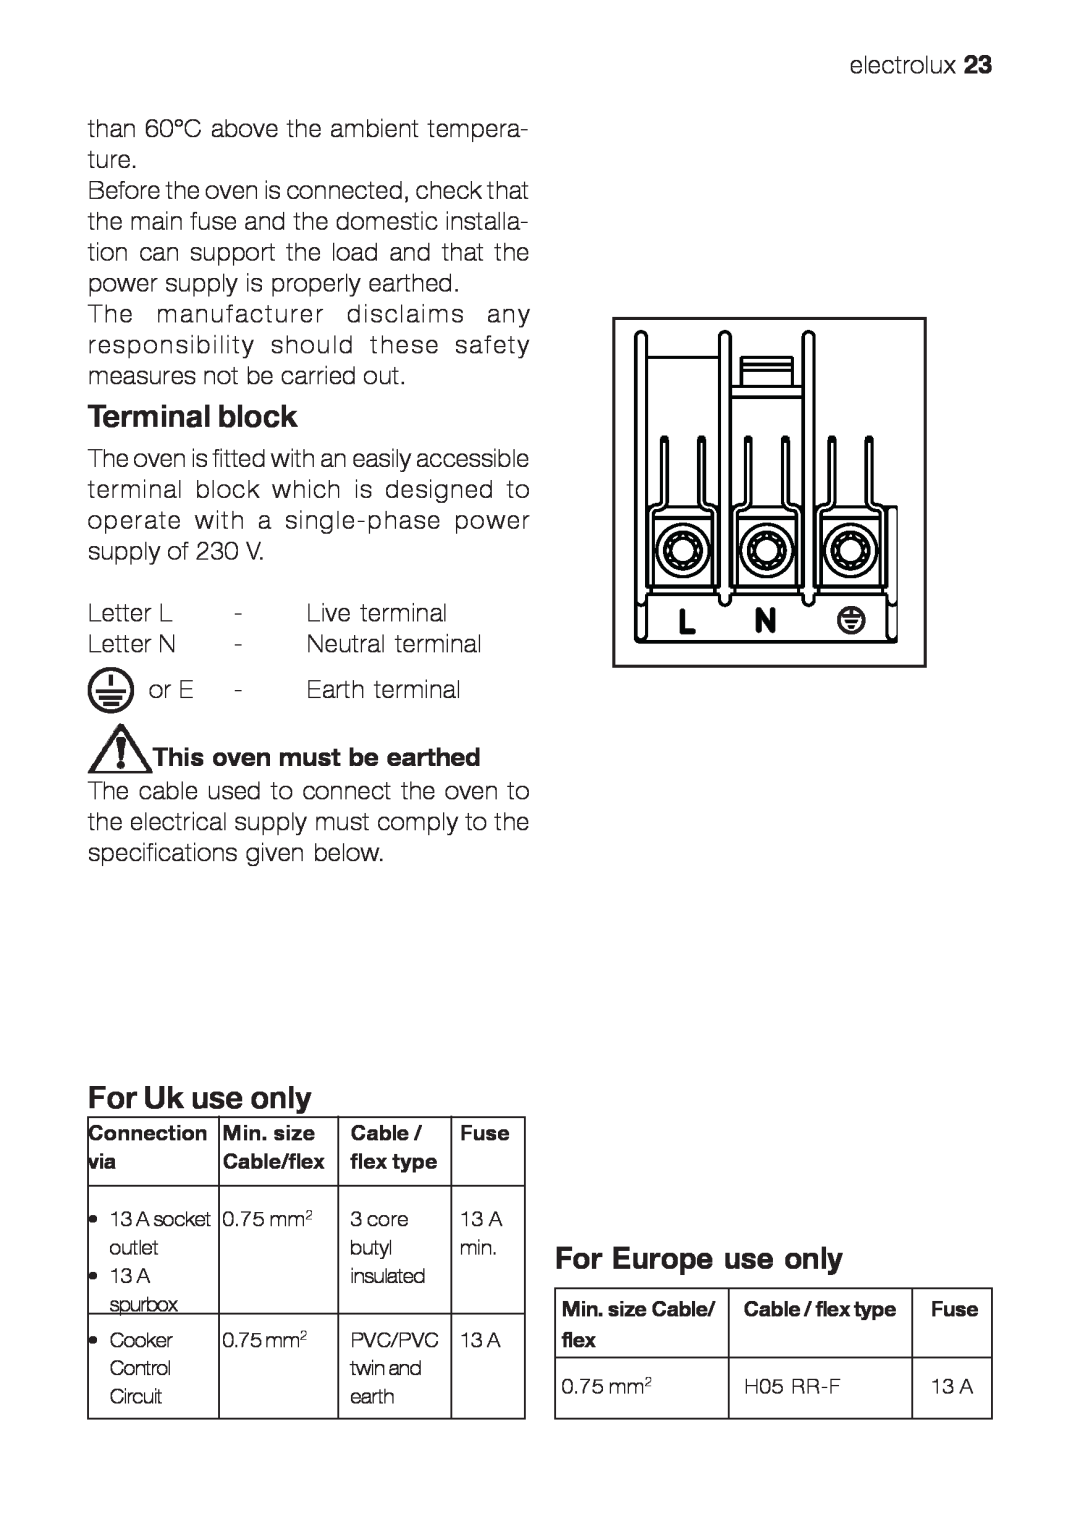 Electrolux EOG 10000 user manual Terminal block, For Uk use only, For Europe use only, This oven must be earthed 